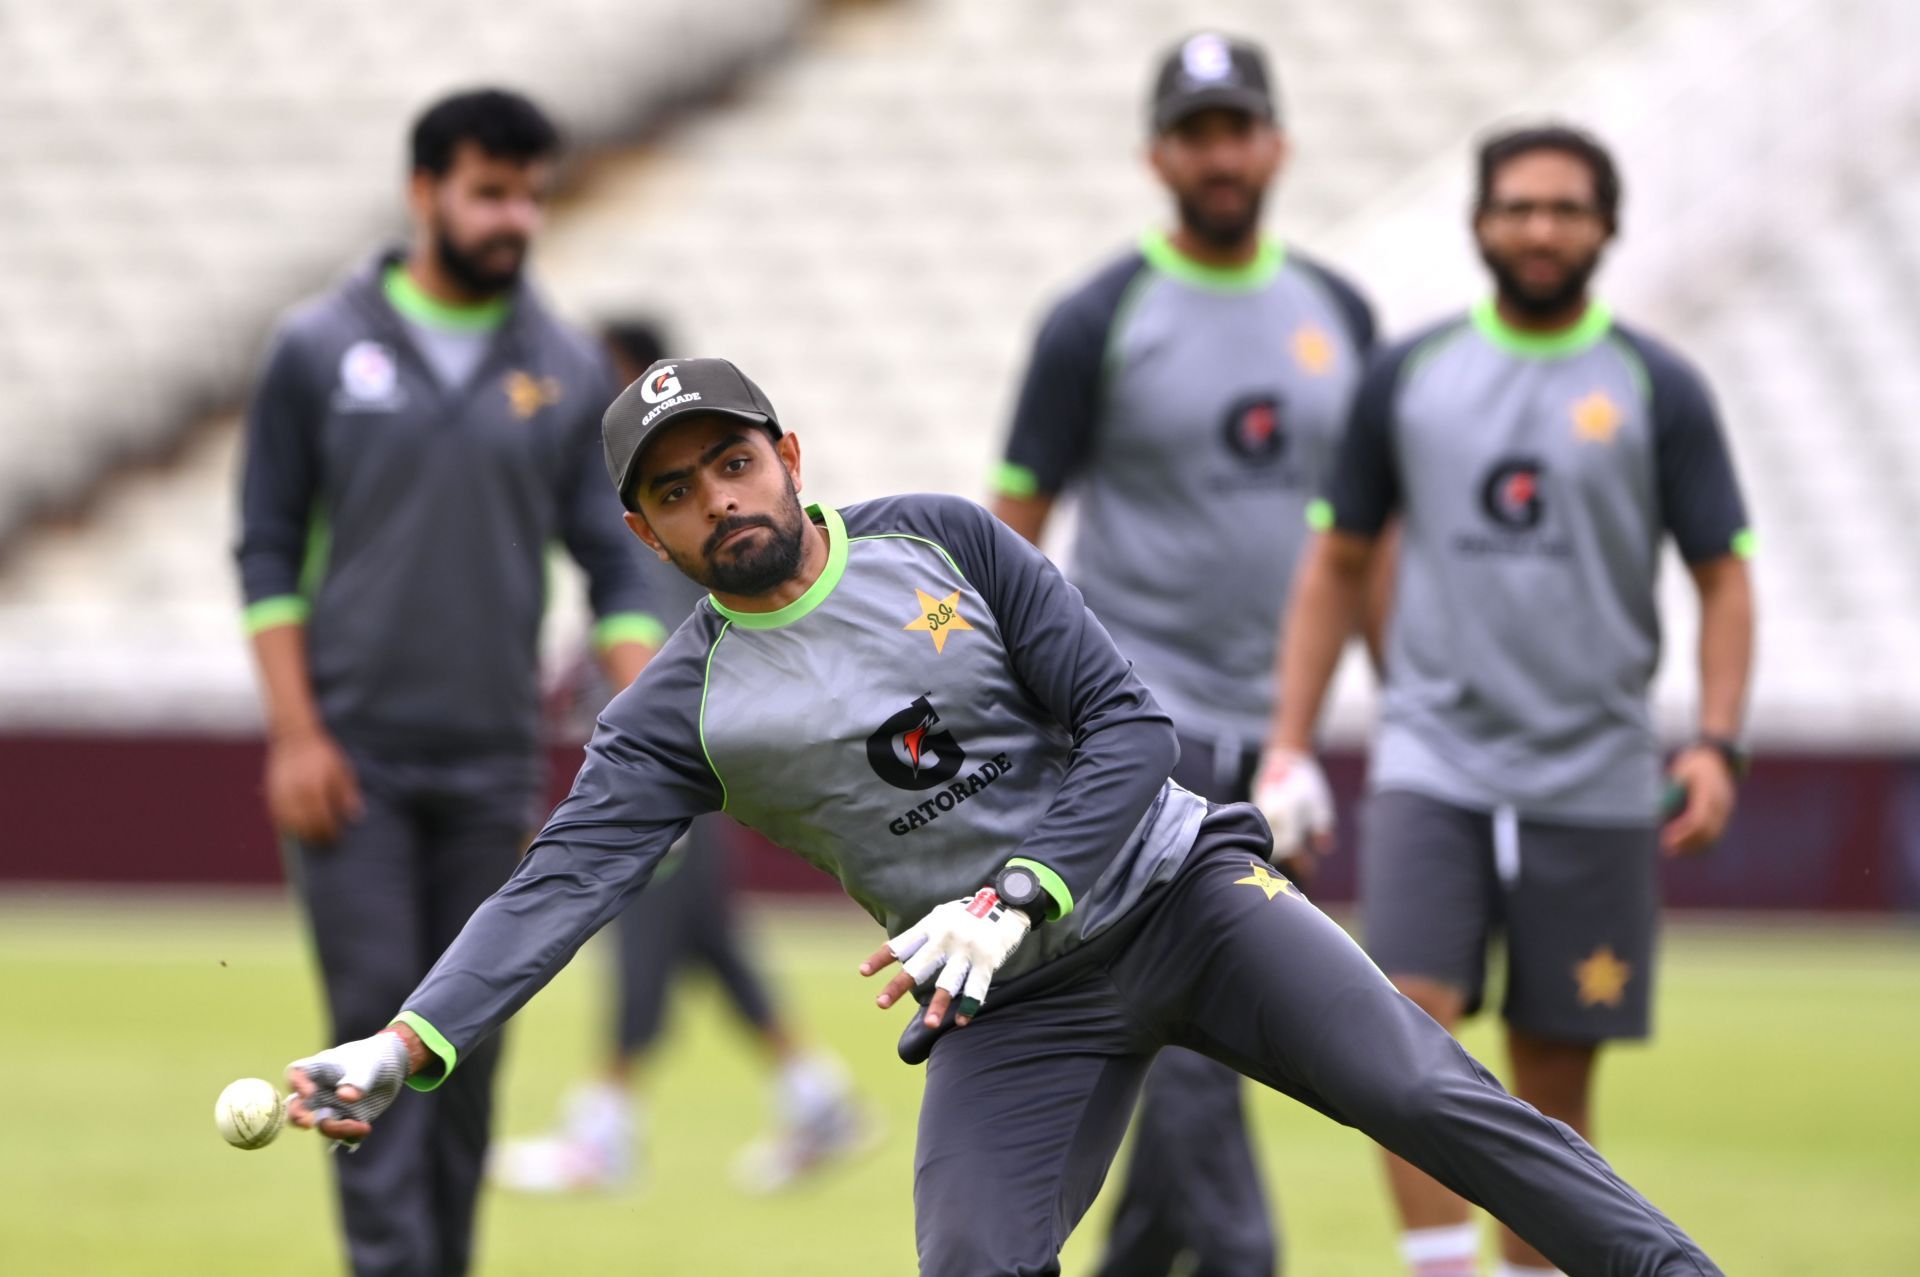 Pakistan will open their World Cup campaign against a qualifier on October 6.